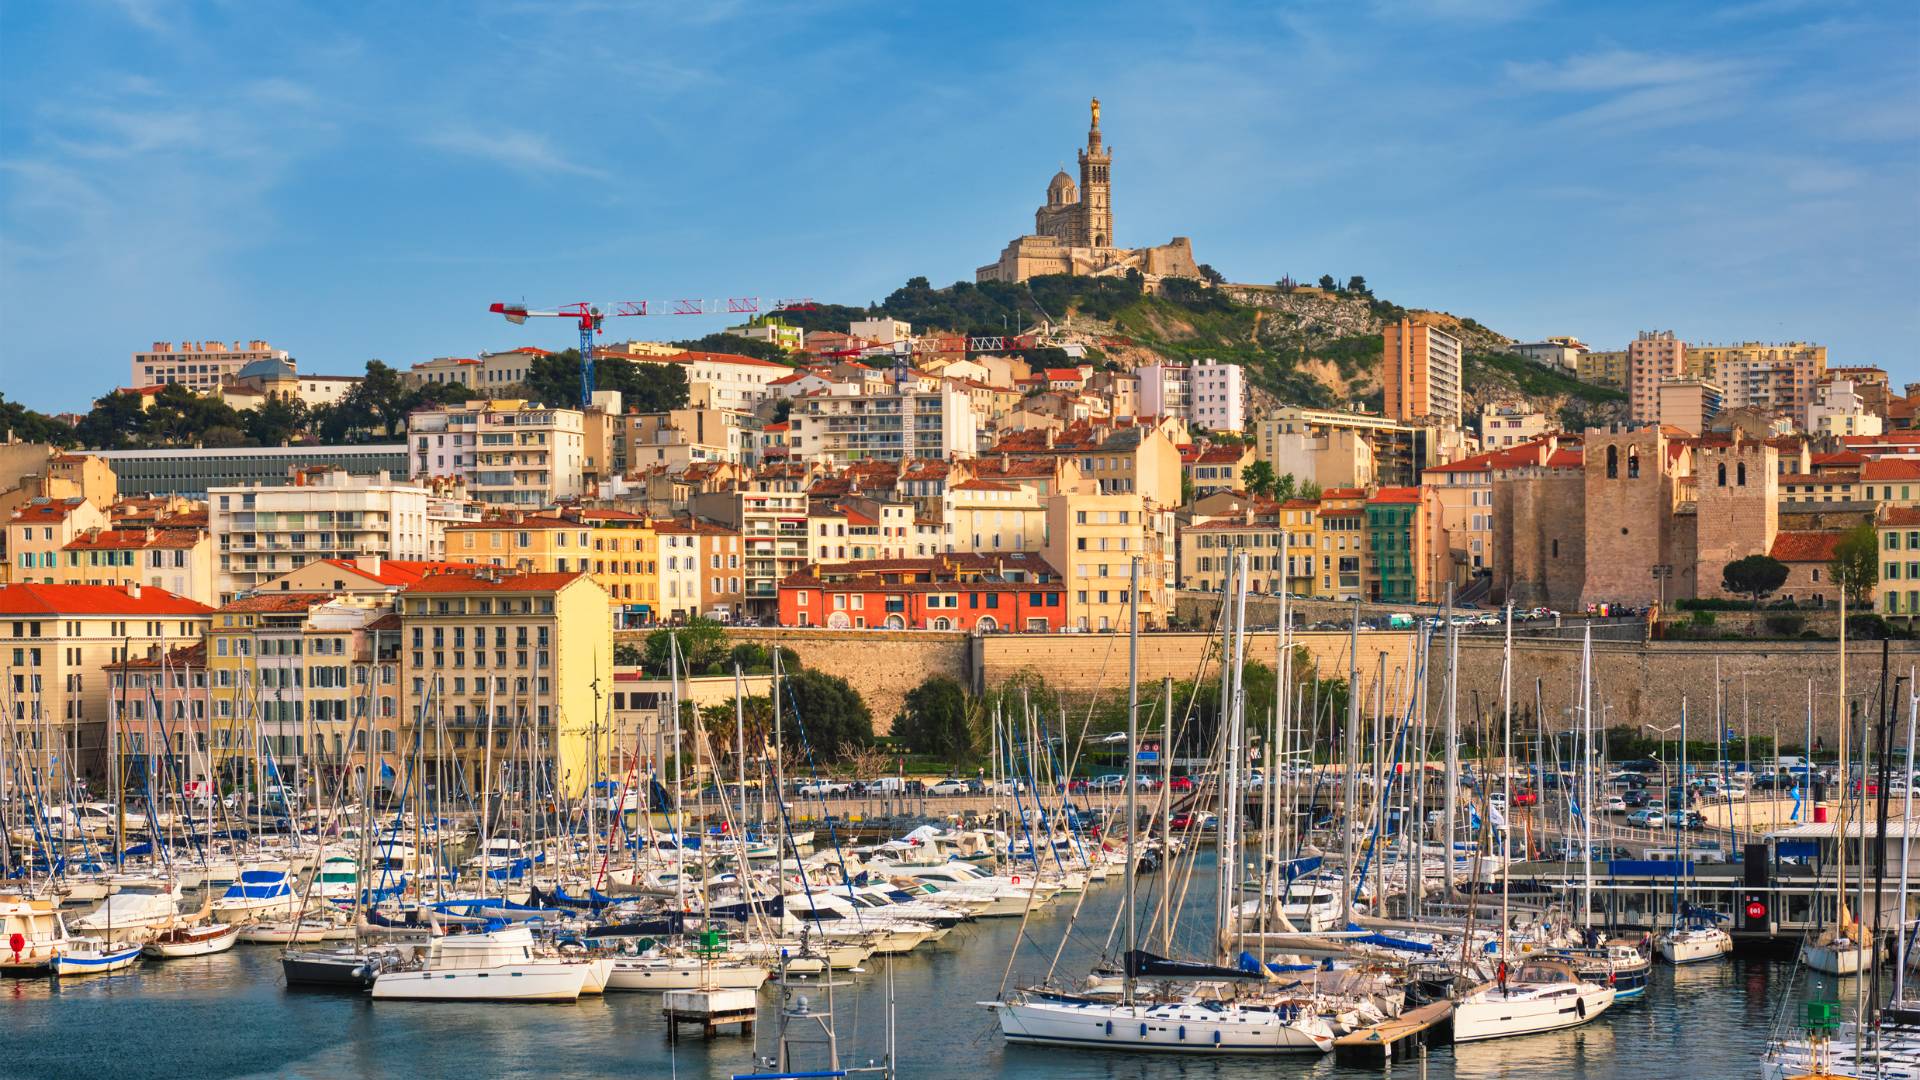 Finding accommodation for wedding guests in Marseille